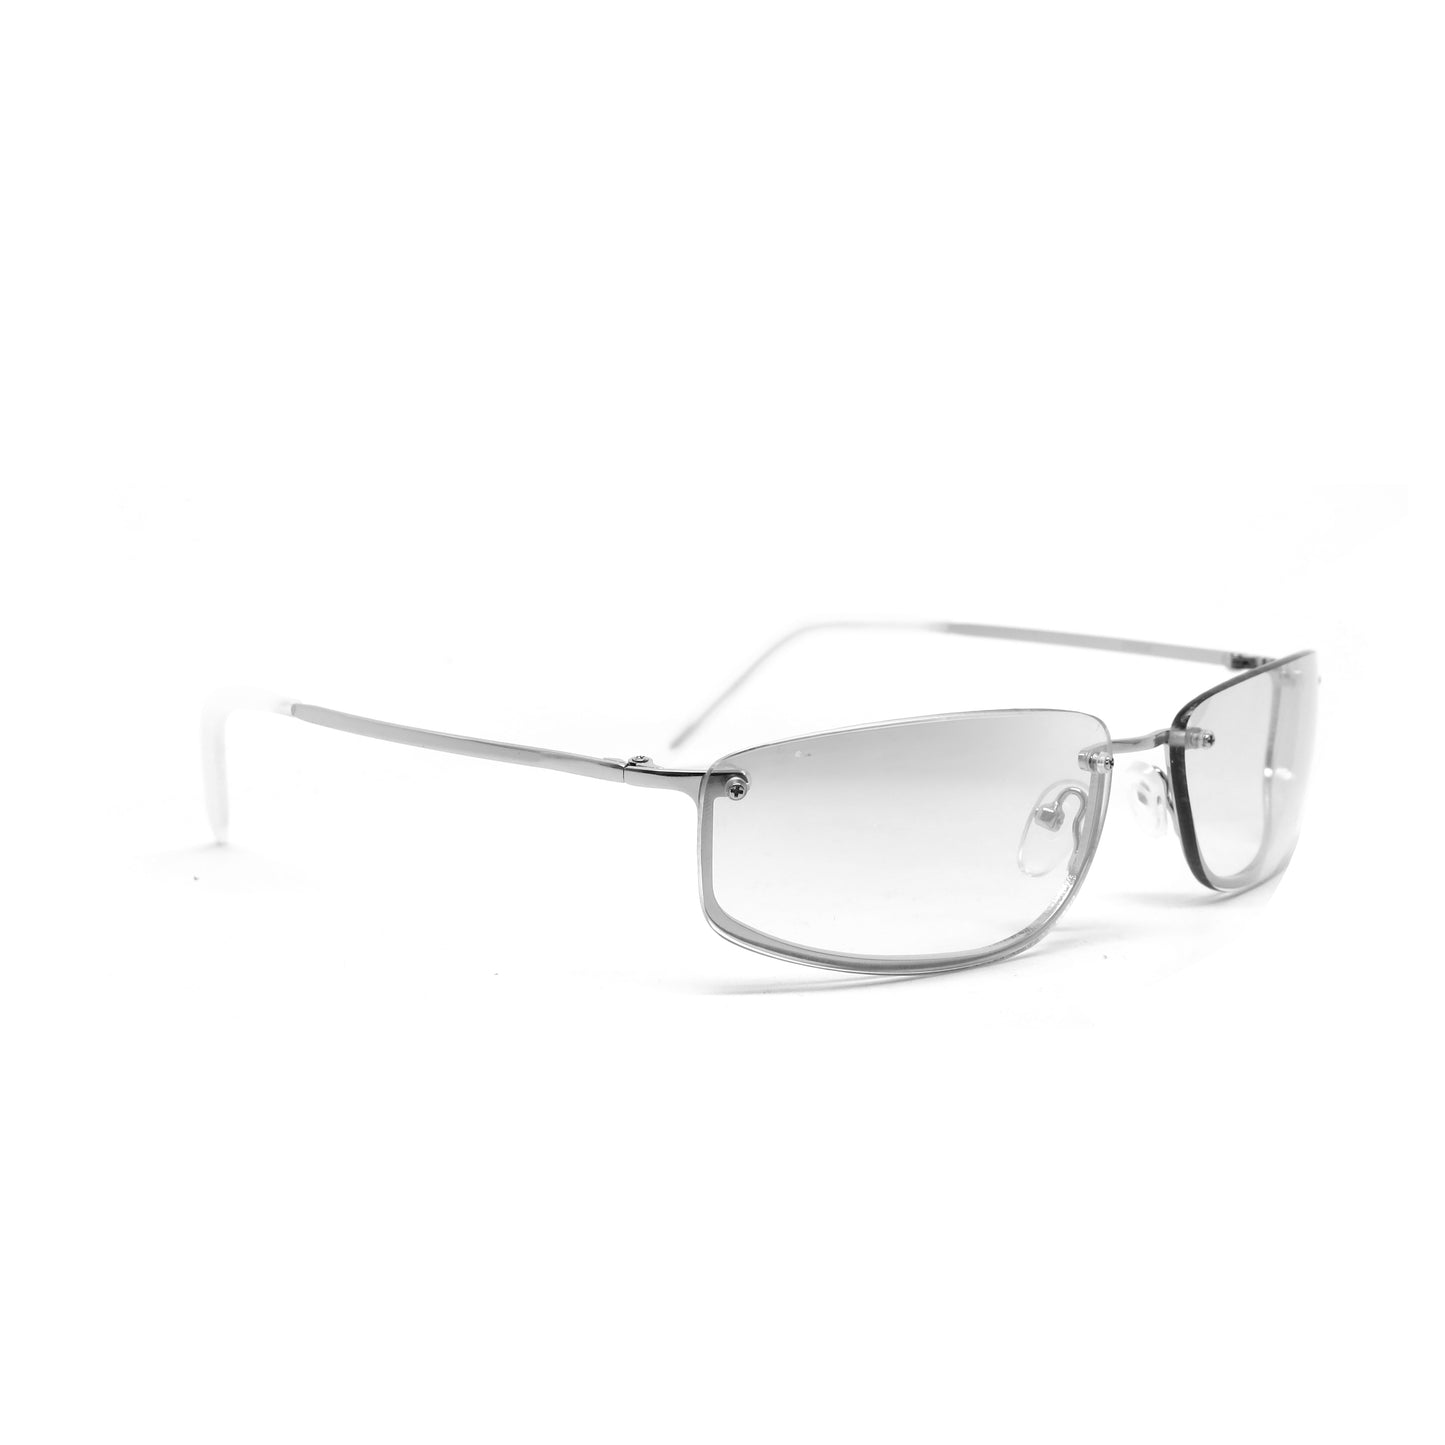 Deluxe Late 90s Vintage Metal Frameless Sunglasses - Clear